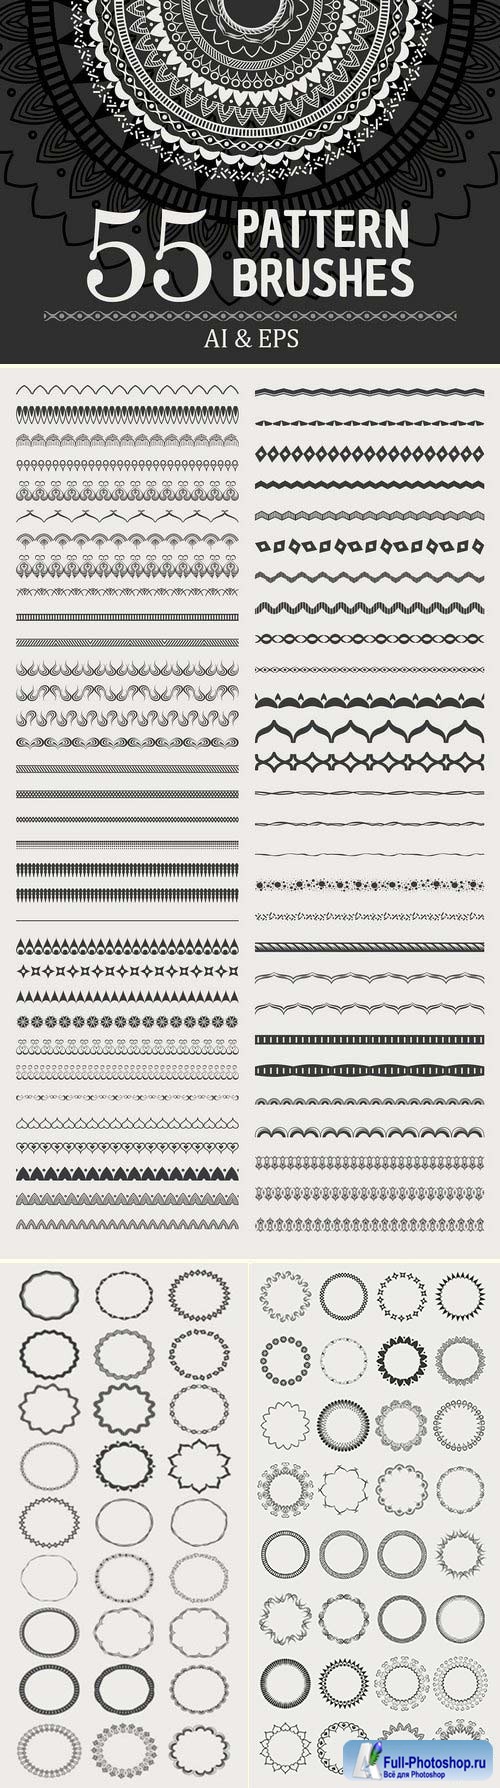 CM - 55 Vector Patterns Brushes 2915269